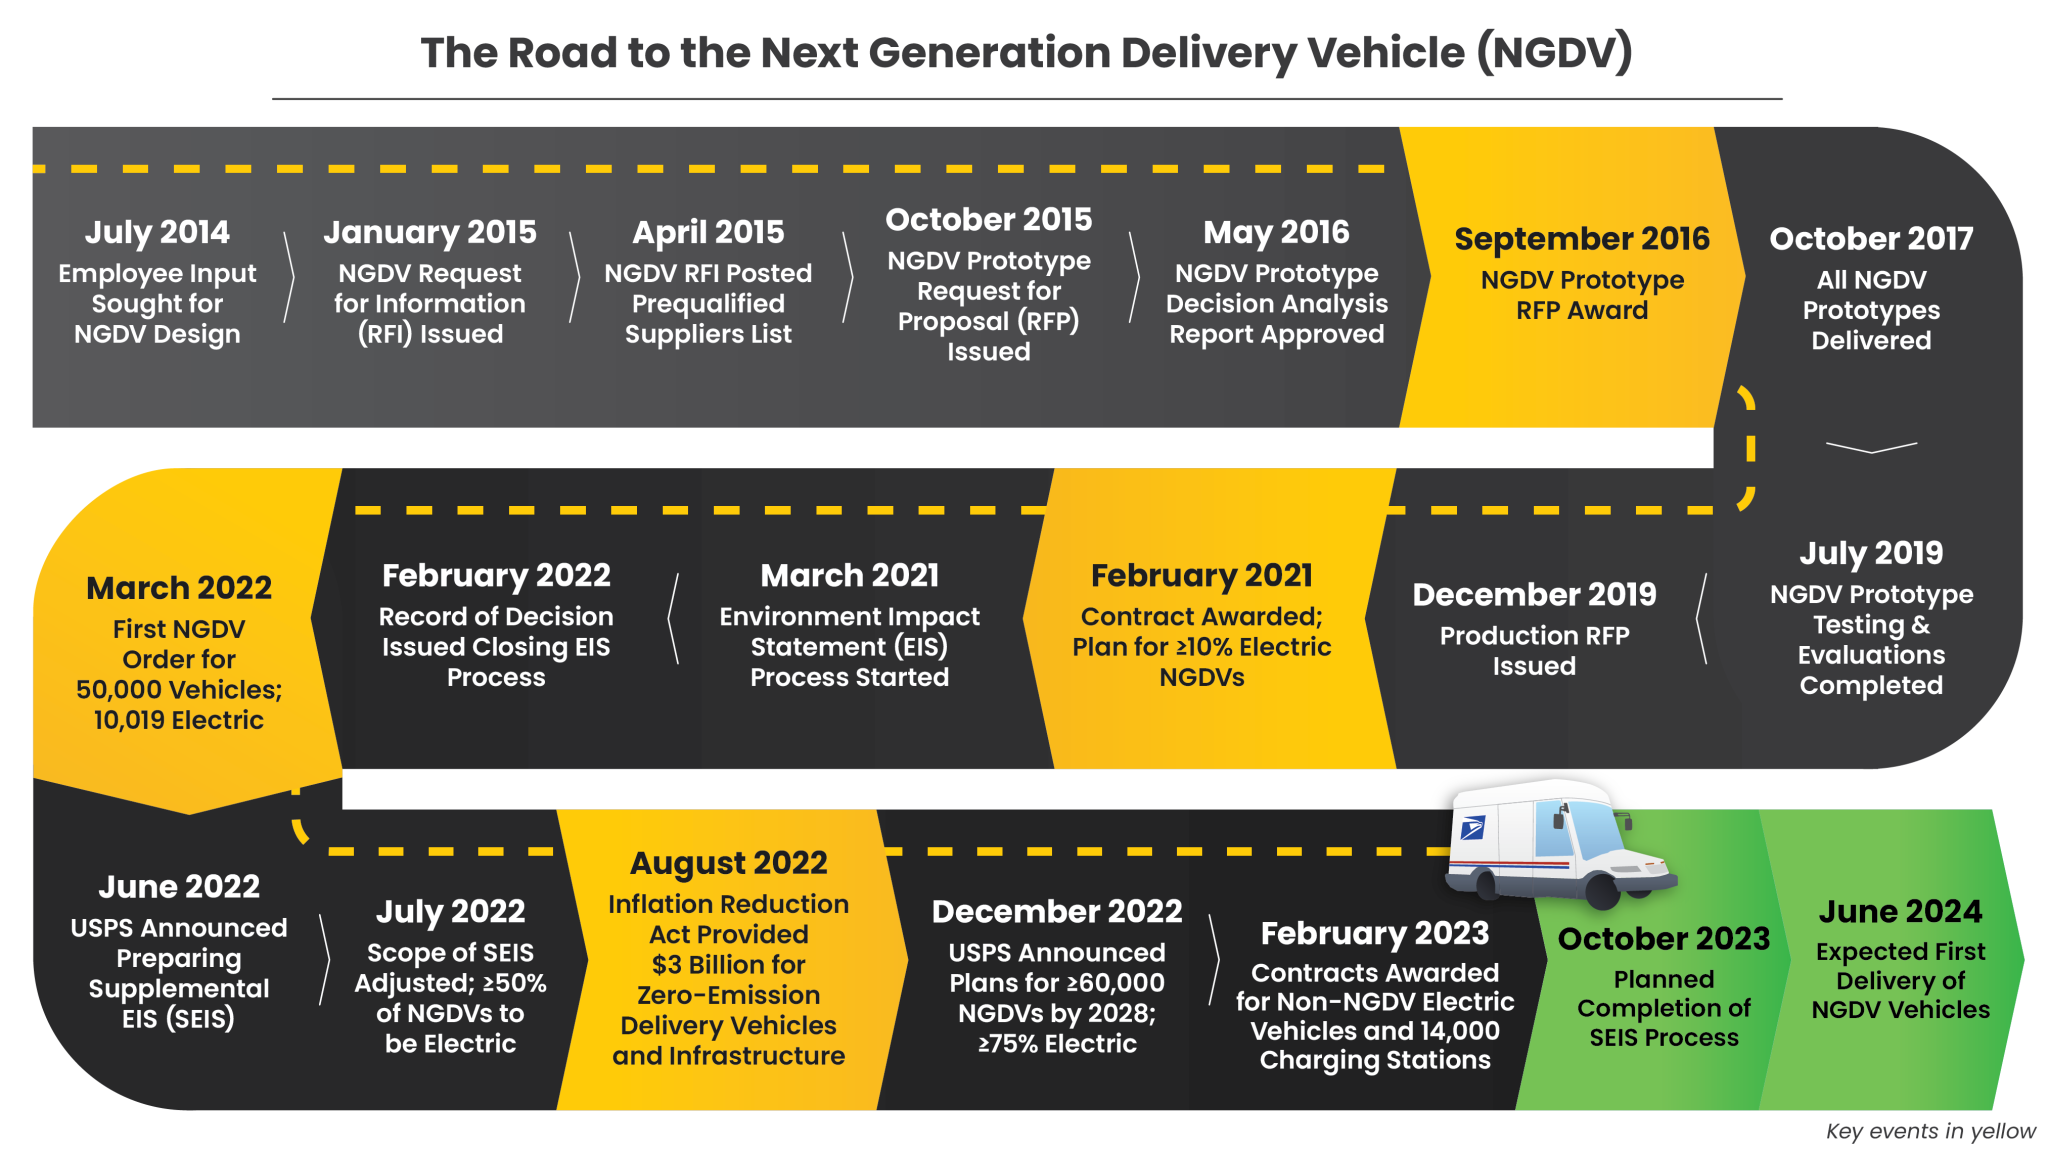 Focus on Next Generation Delivery Vehicles timeline